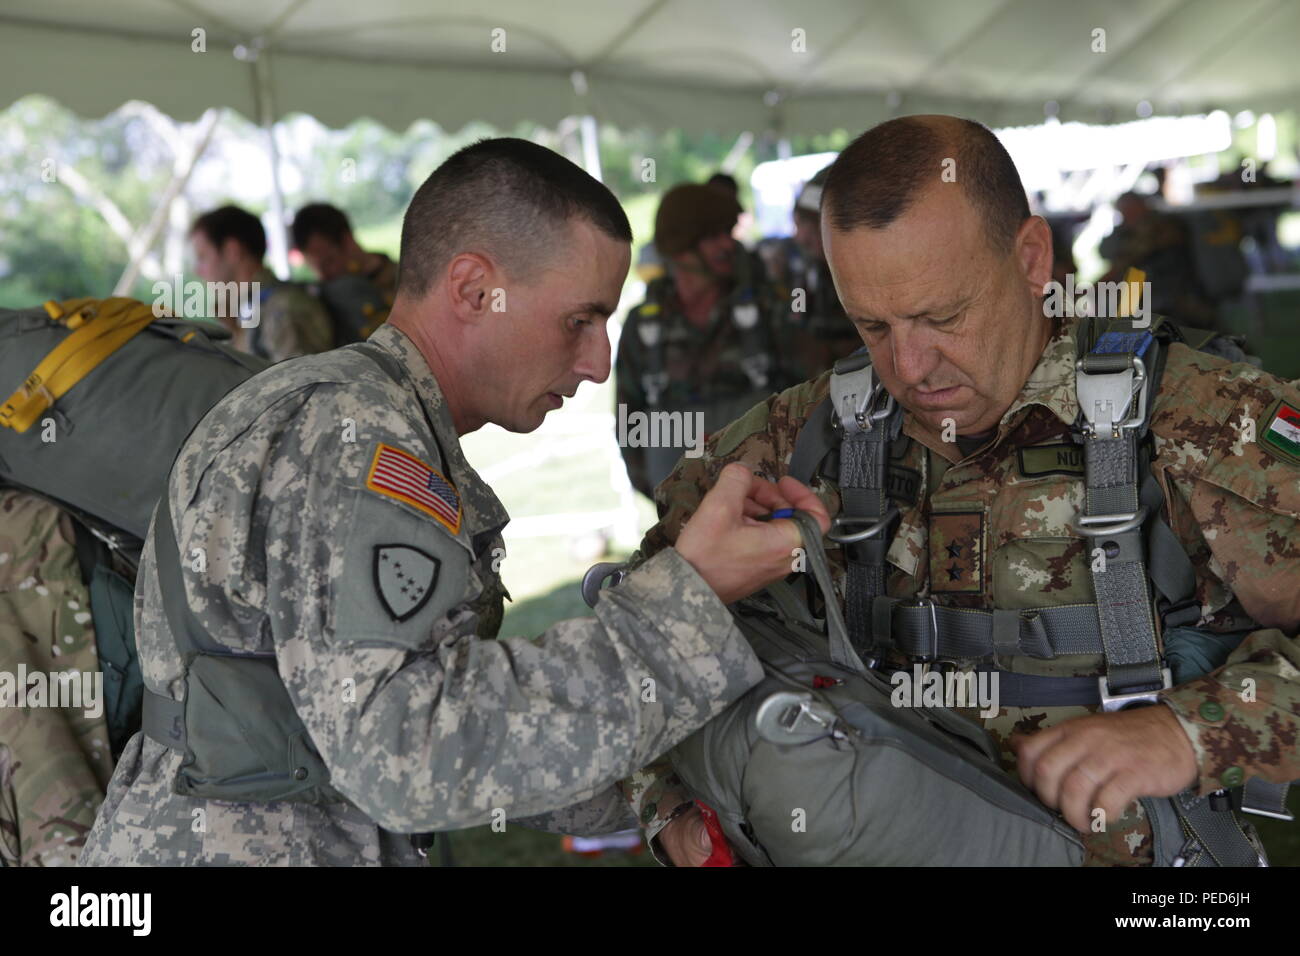 U.S. Army Staff Sgt. Paul Norwood from B Company, 1st Battalion, 143rd Infantry Regiment, Alaska National Guard, aids Italian 1st Lt. Antonio Nucera check the attachment of his reserve parachute for the wing exchange jump, Aug. 3, 2015.  Leapfest is an International parachute competition hosted by the 56th Troop Command, Rhode Island National Guard to promote high level technical training and esprit de corps within the International Airborne community. (U.S. Army Photo by Sgt. 1st Class Horace Murray/Released) Stock Photo